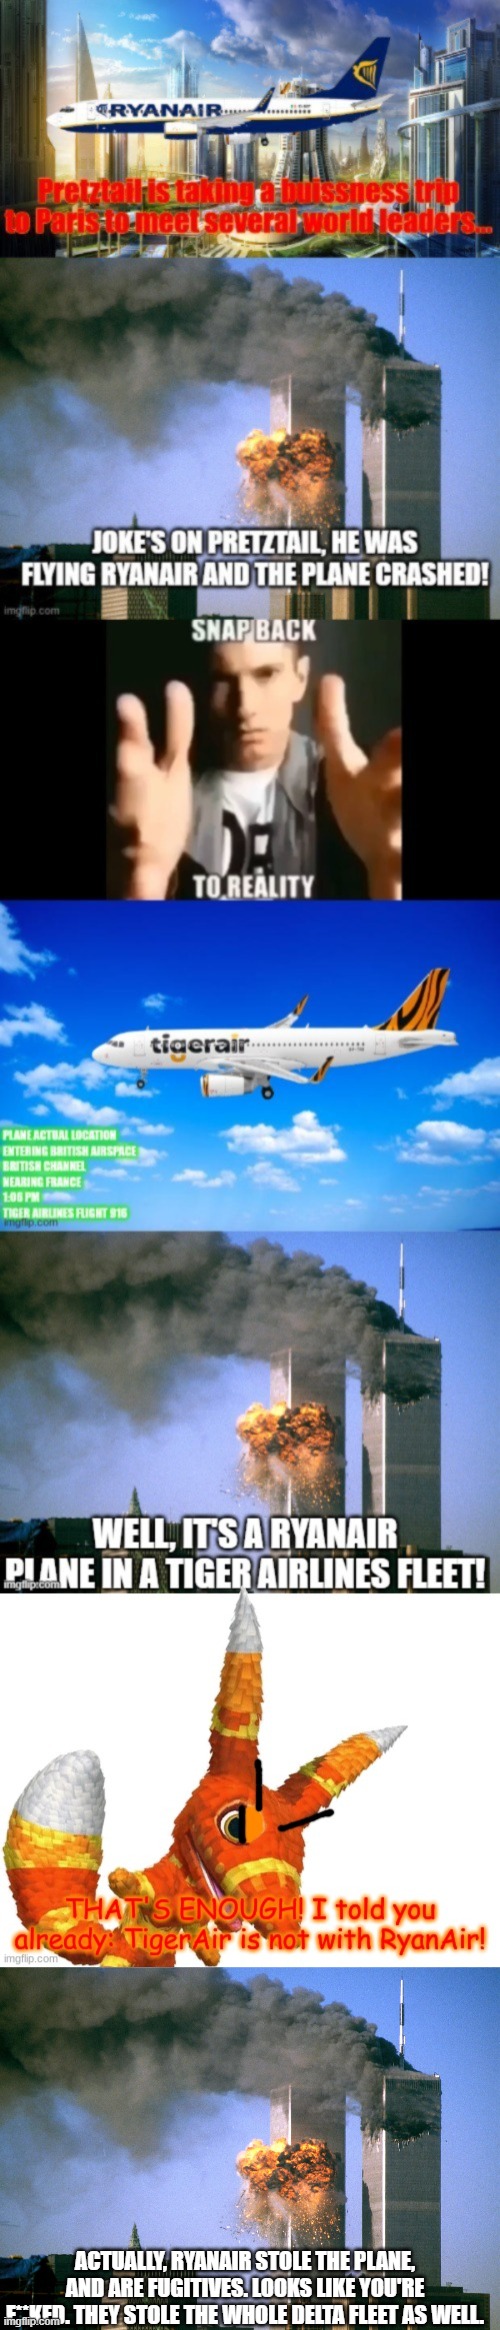 At the rate this is going, Ryanair is a terrorist company. | ACTUALLY, RYANAIR STOLE THE PLANE, AND ARE FUGITIVES. LOOKS LIKE YOU'RE F**KED. THEY STOLE THE WHOLE DELTA FLEET AS WELL. | image tagged in 911 9/11 twin towers impact | made w/ Imgflip meme maker